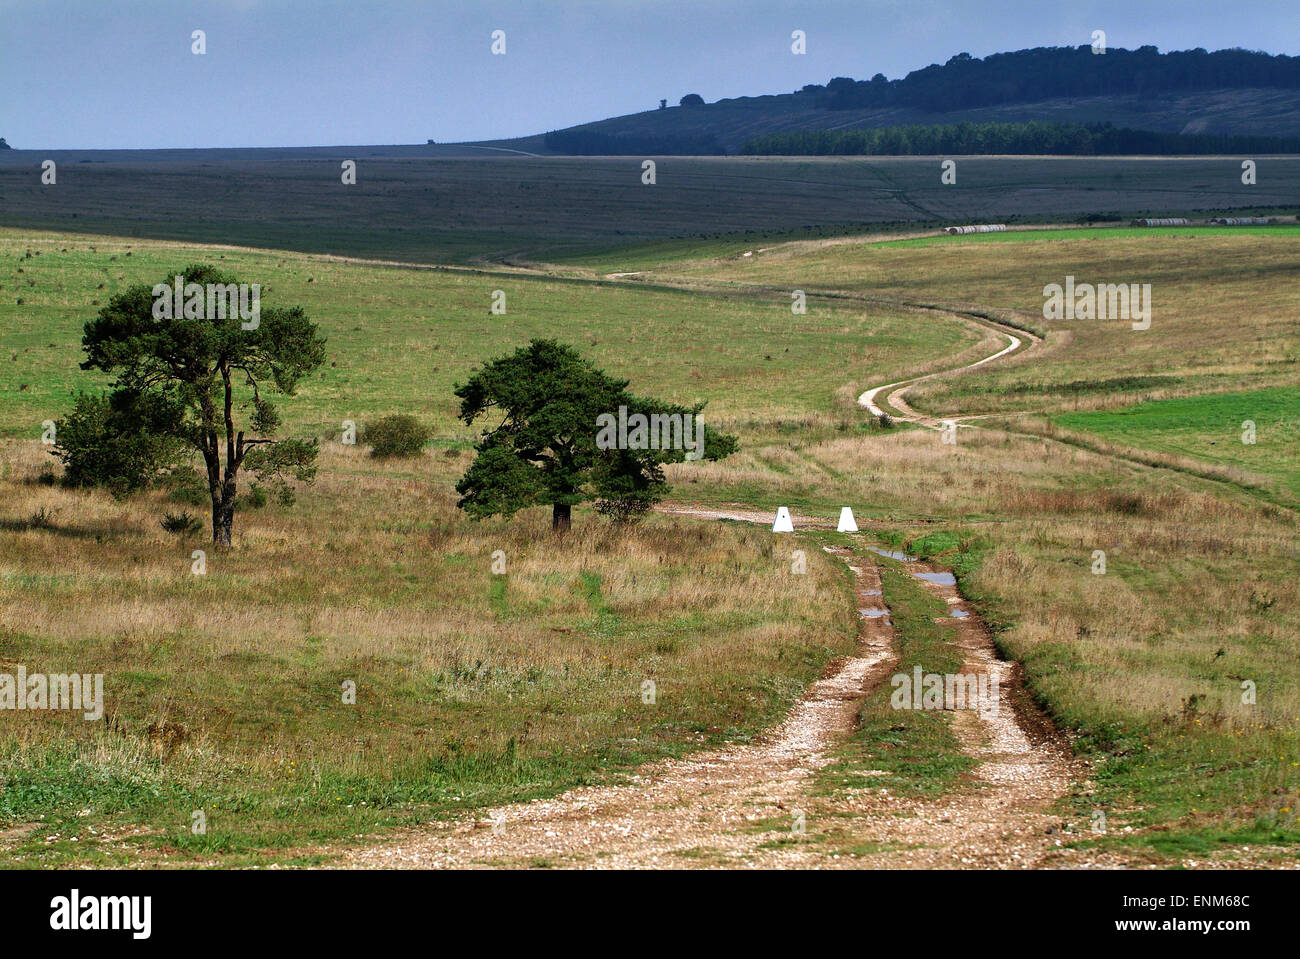 Salisbury Plain, Wiltshire, UK, used as a military training area by the British Army. Pictures show redundant Chieftan tanks used as targets and signs Stock Photo